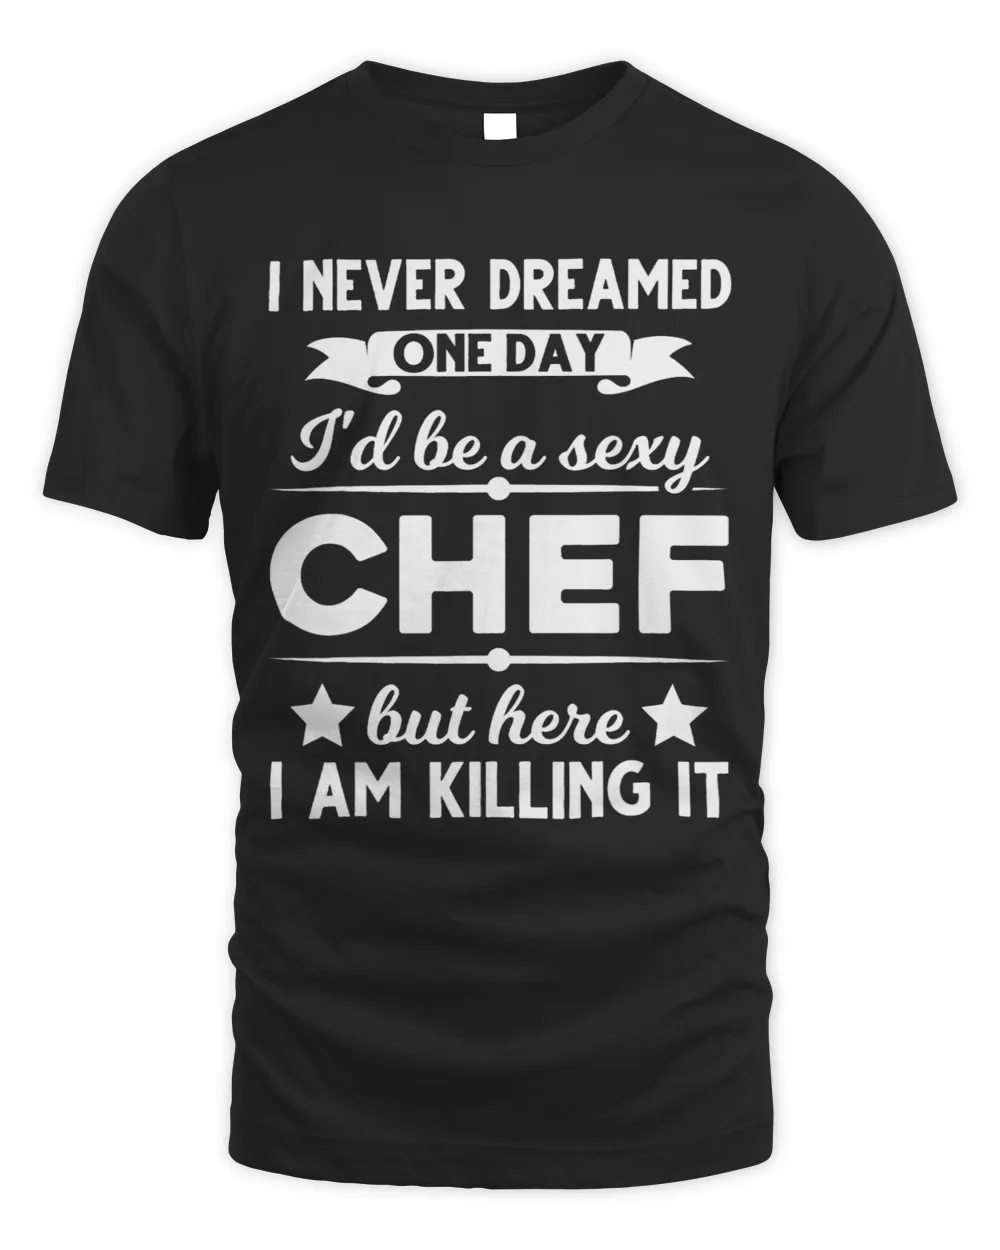 Im a sexy chef Im killing him Cook Cooking